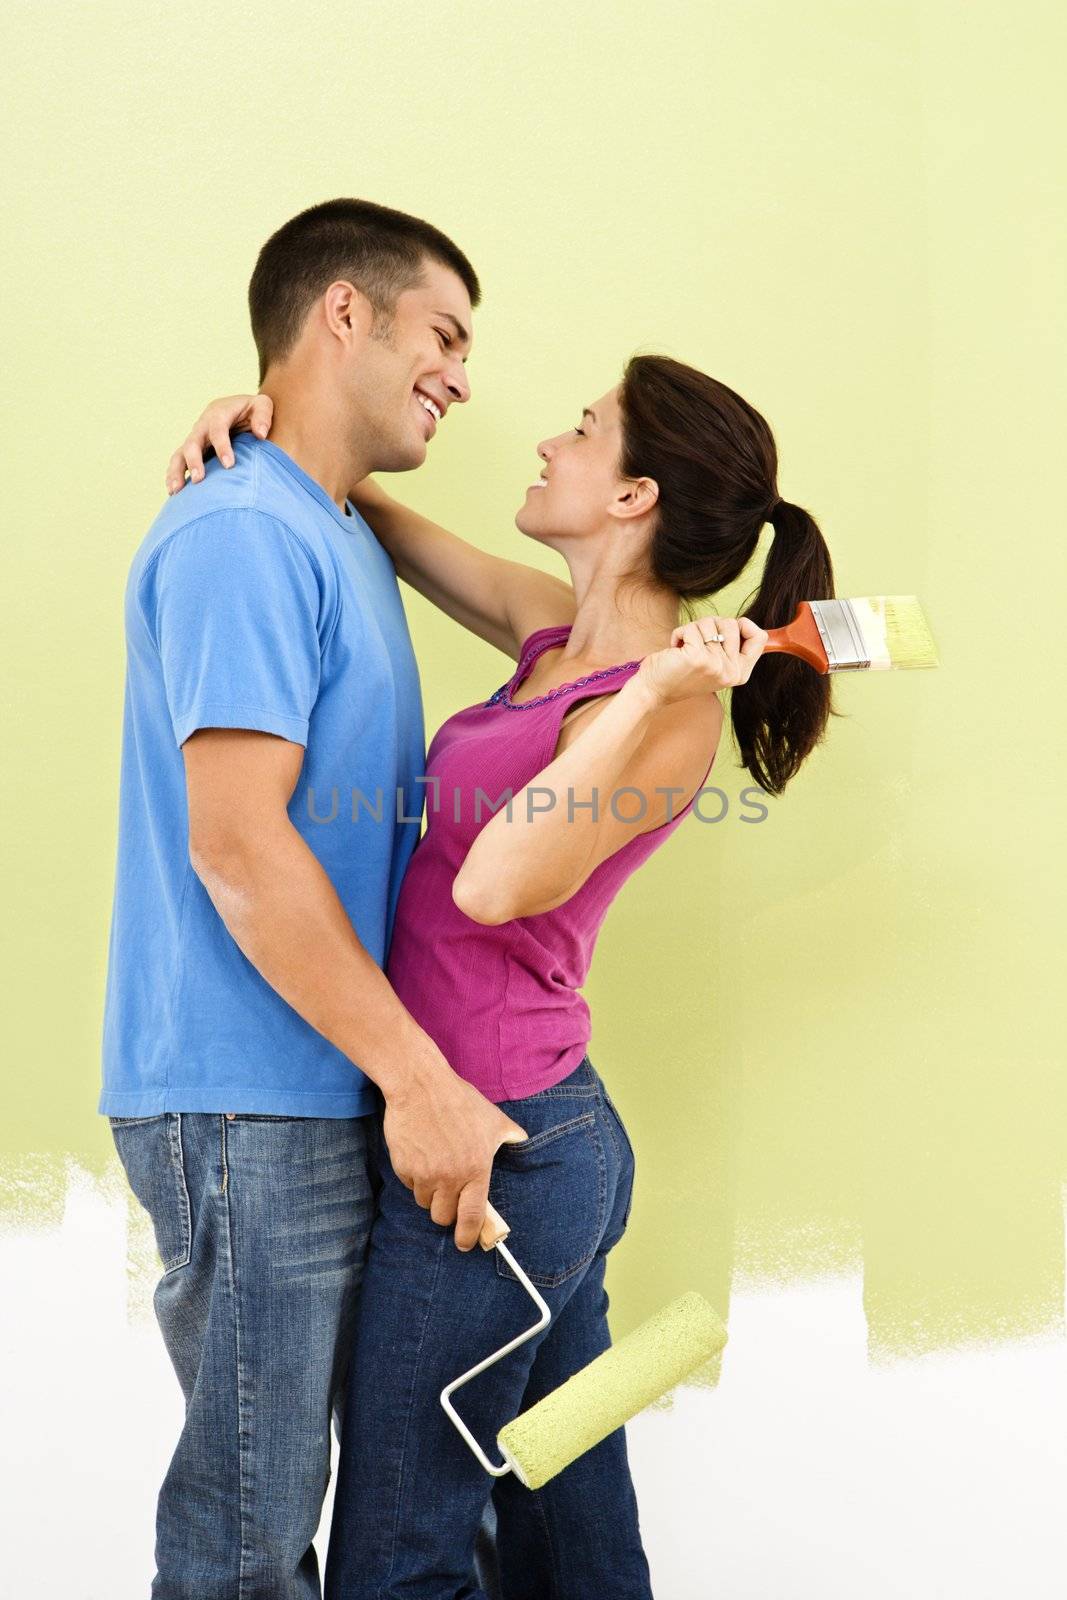 Couple hugging and smiling at eachother holding paintbrushes in front of partially painted wall.